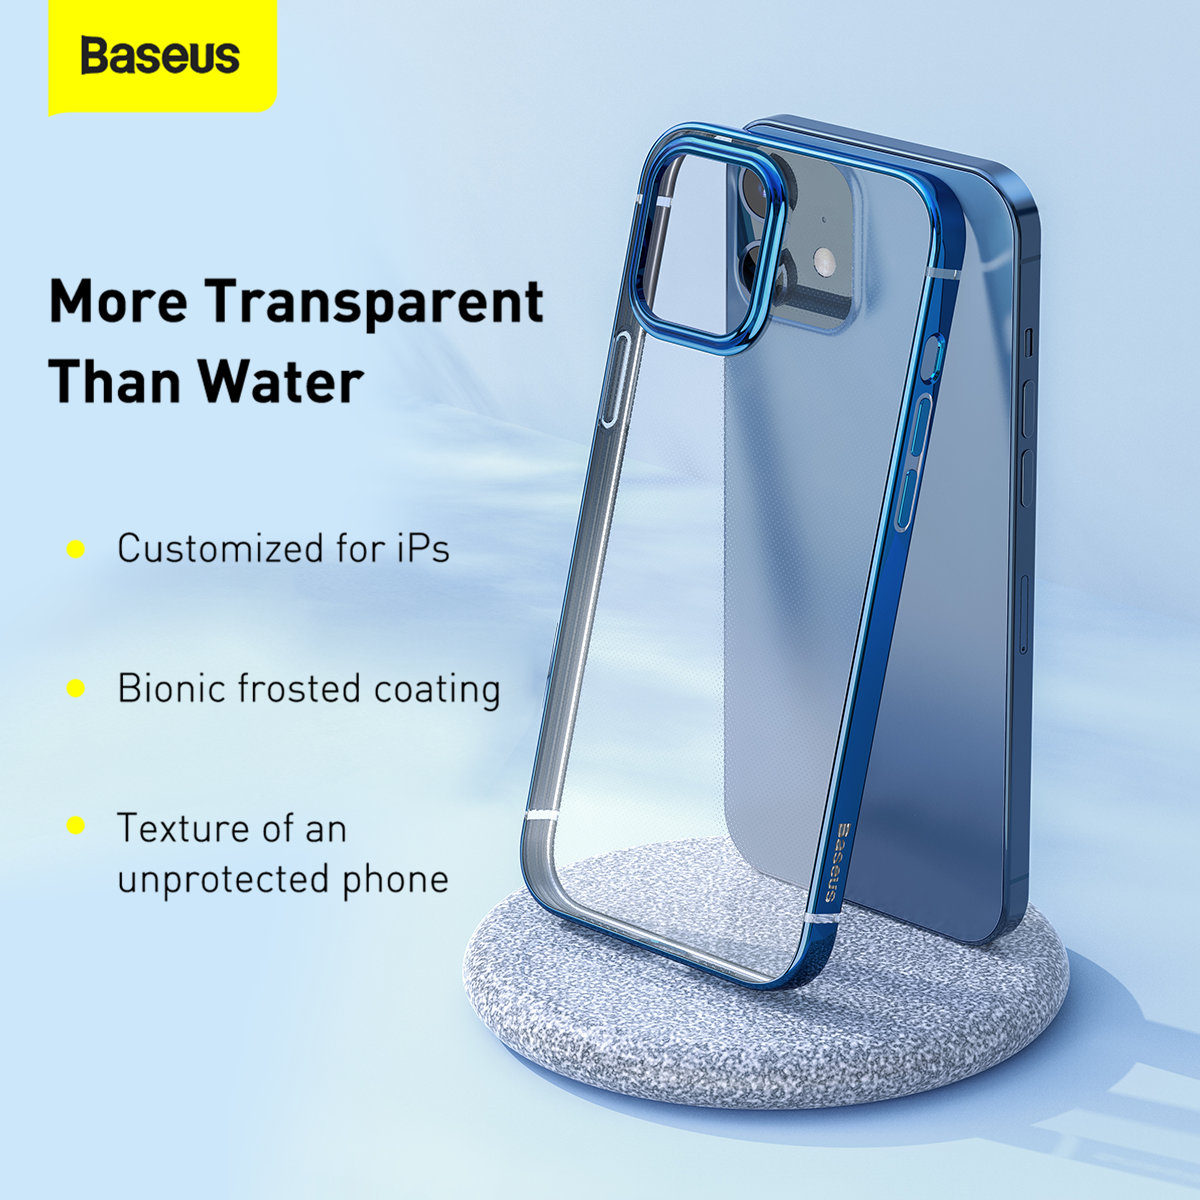 Baseus Plating Ultra-thin Crystal Clear Transparent Non-Yellow Shockproof Soft TPU Protective Case for iPhone 12 Mini 5.4 inch